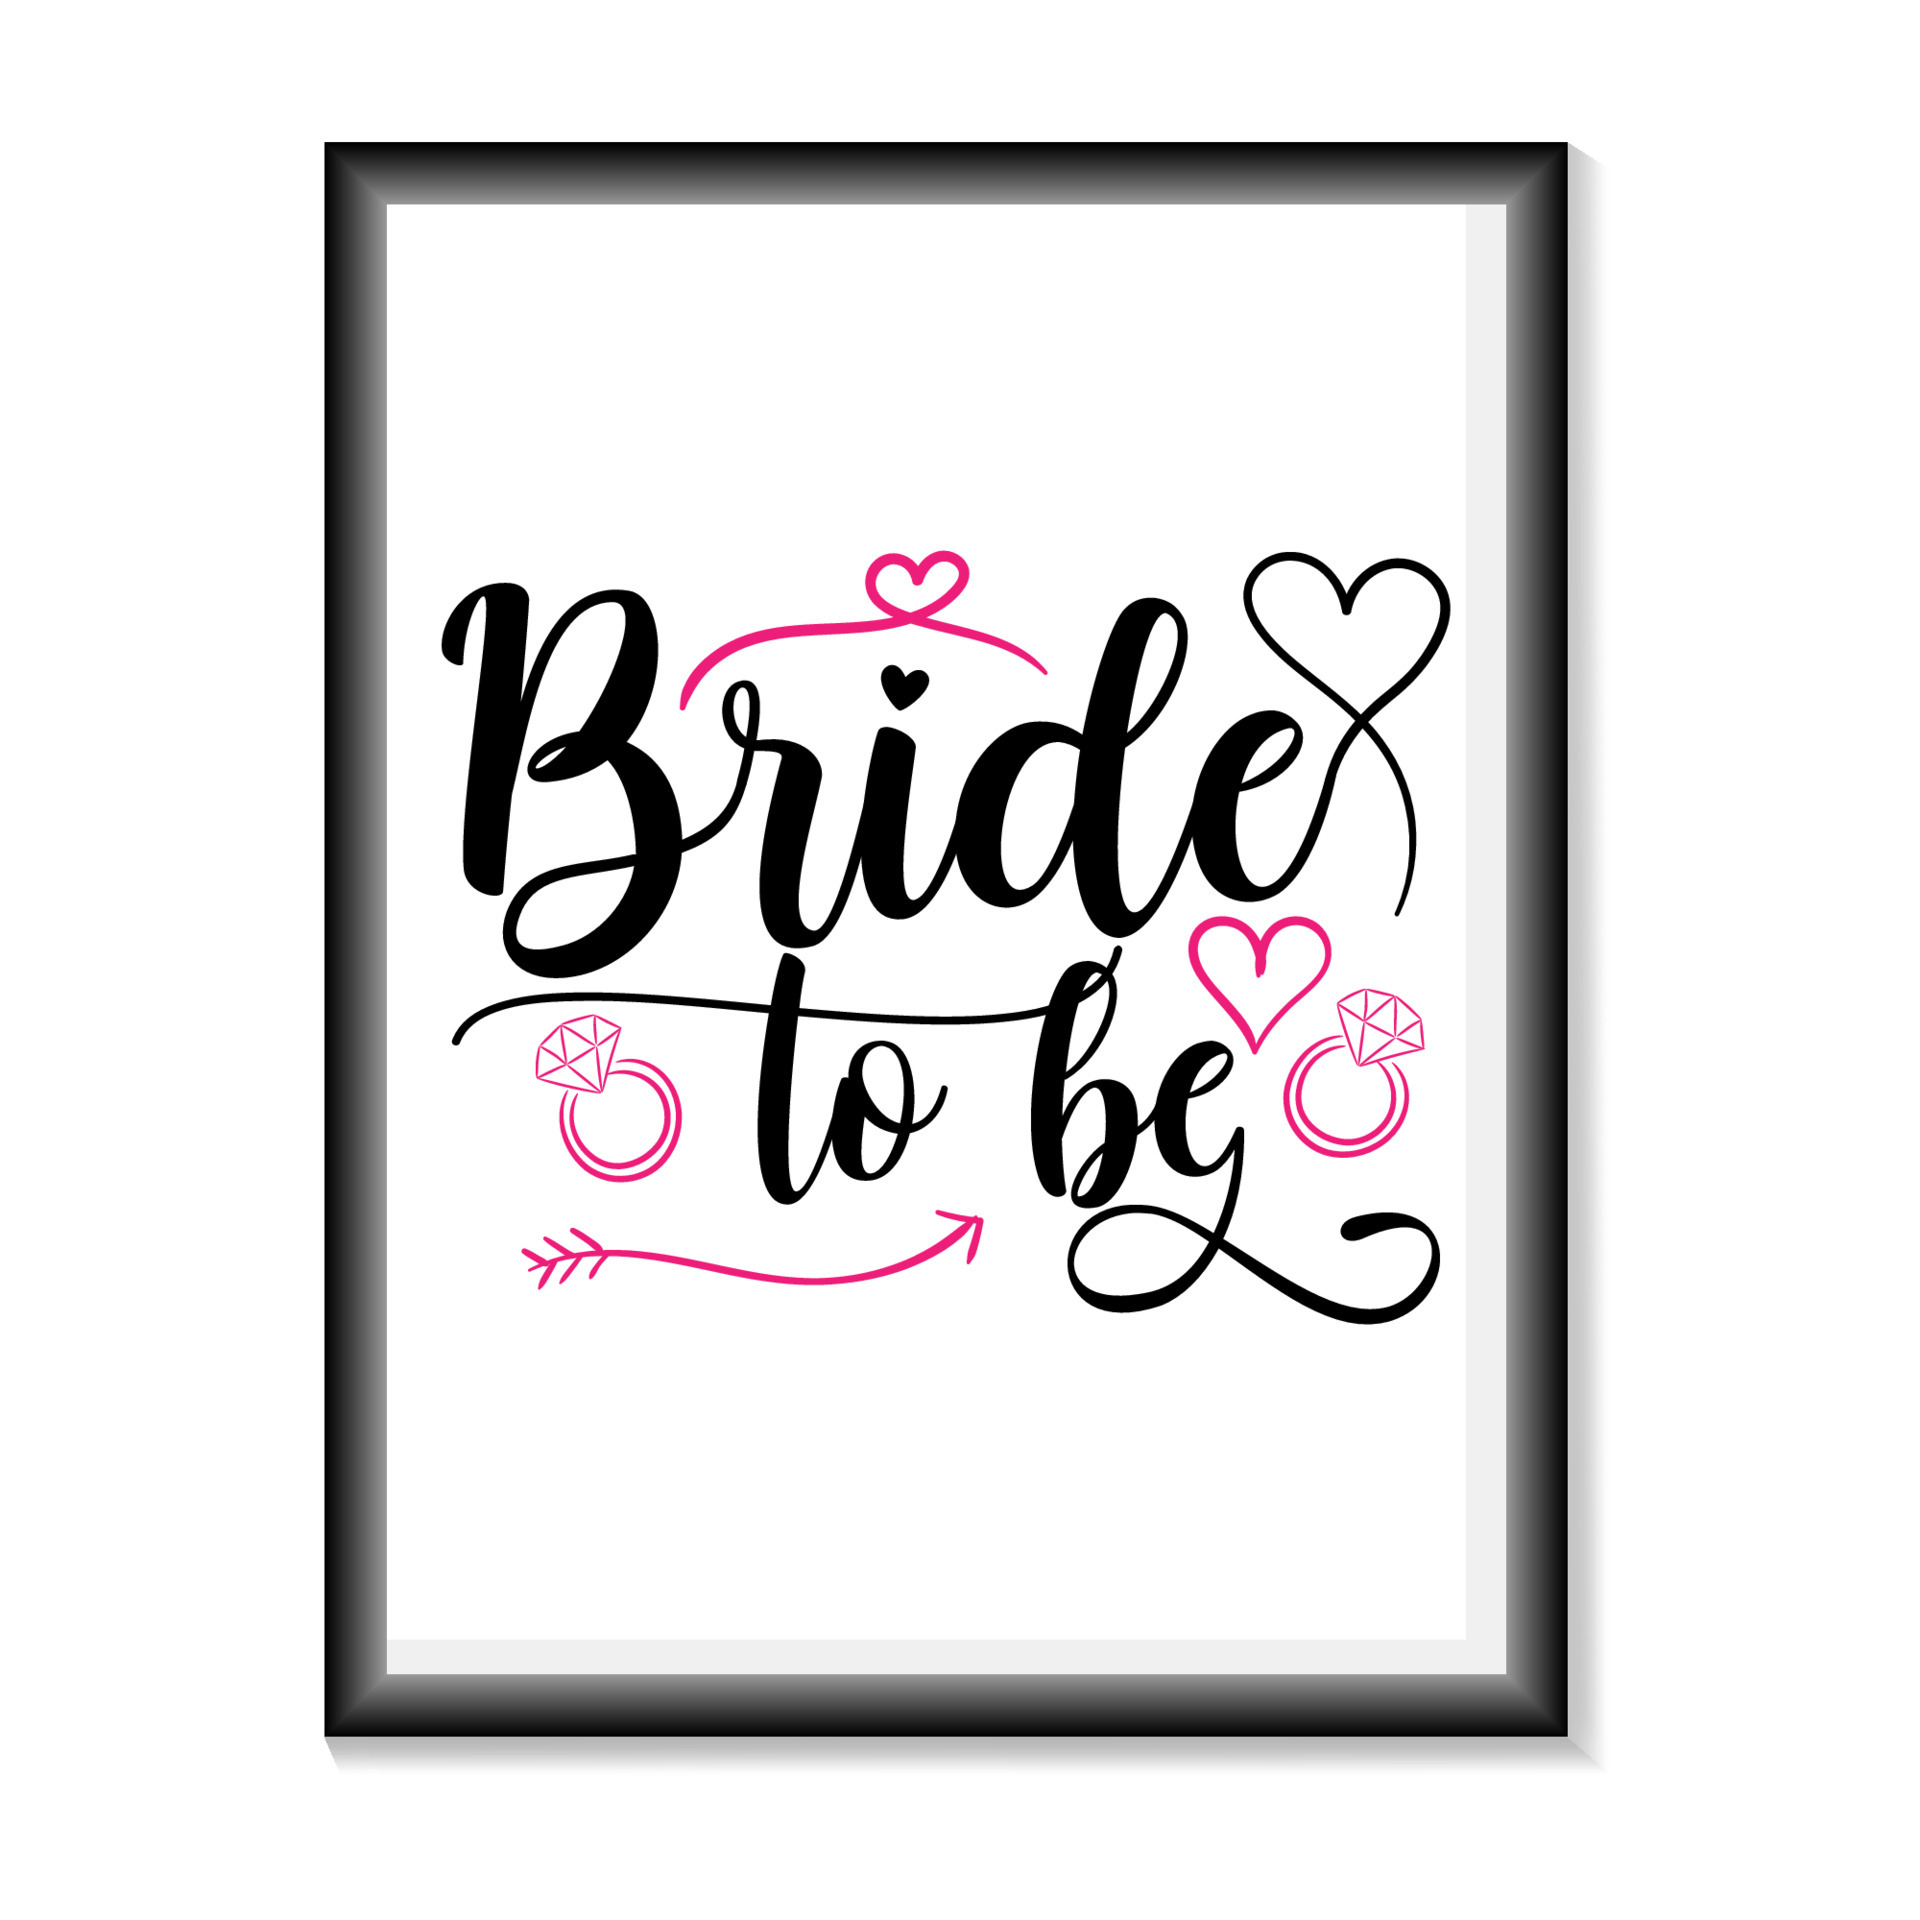 https://static.vecteezy.com/system/resources/previews/006/018/334/original/bride-to-be-wedding-quotes-svg-bridal-party-hand-lettering-svg-for-t-shirts-mugs-bags-poster-cards-and-much-more-vector.jpg